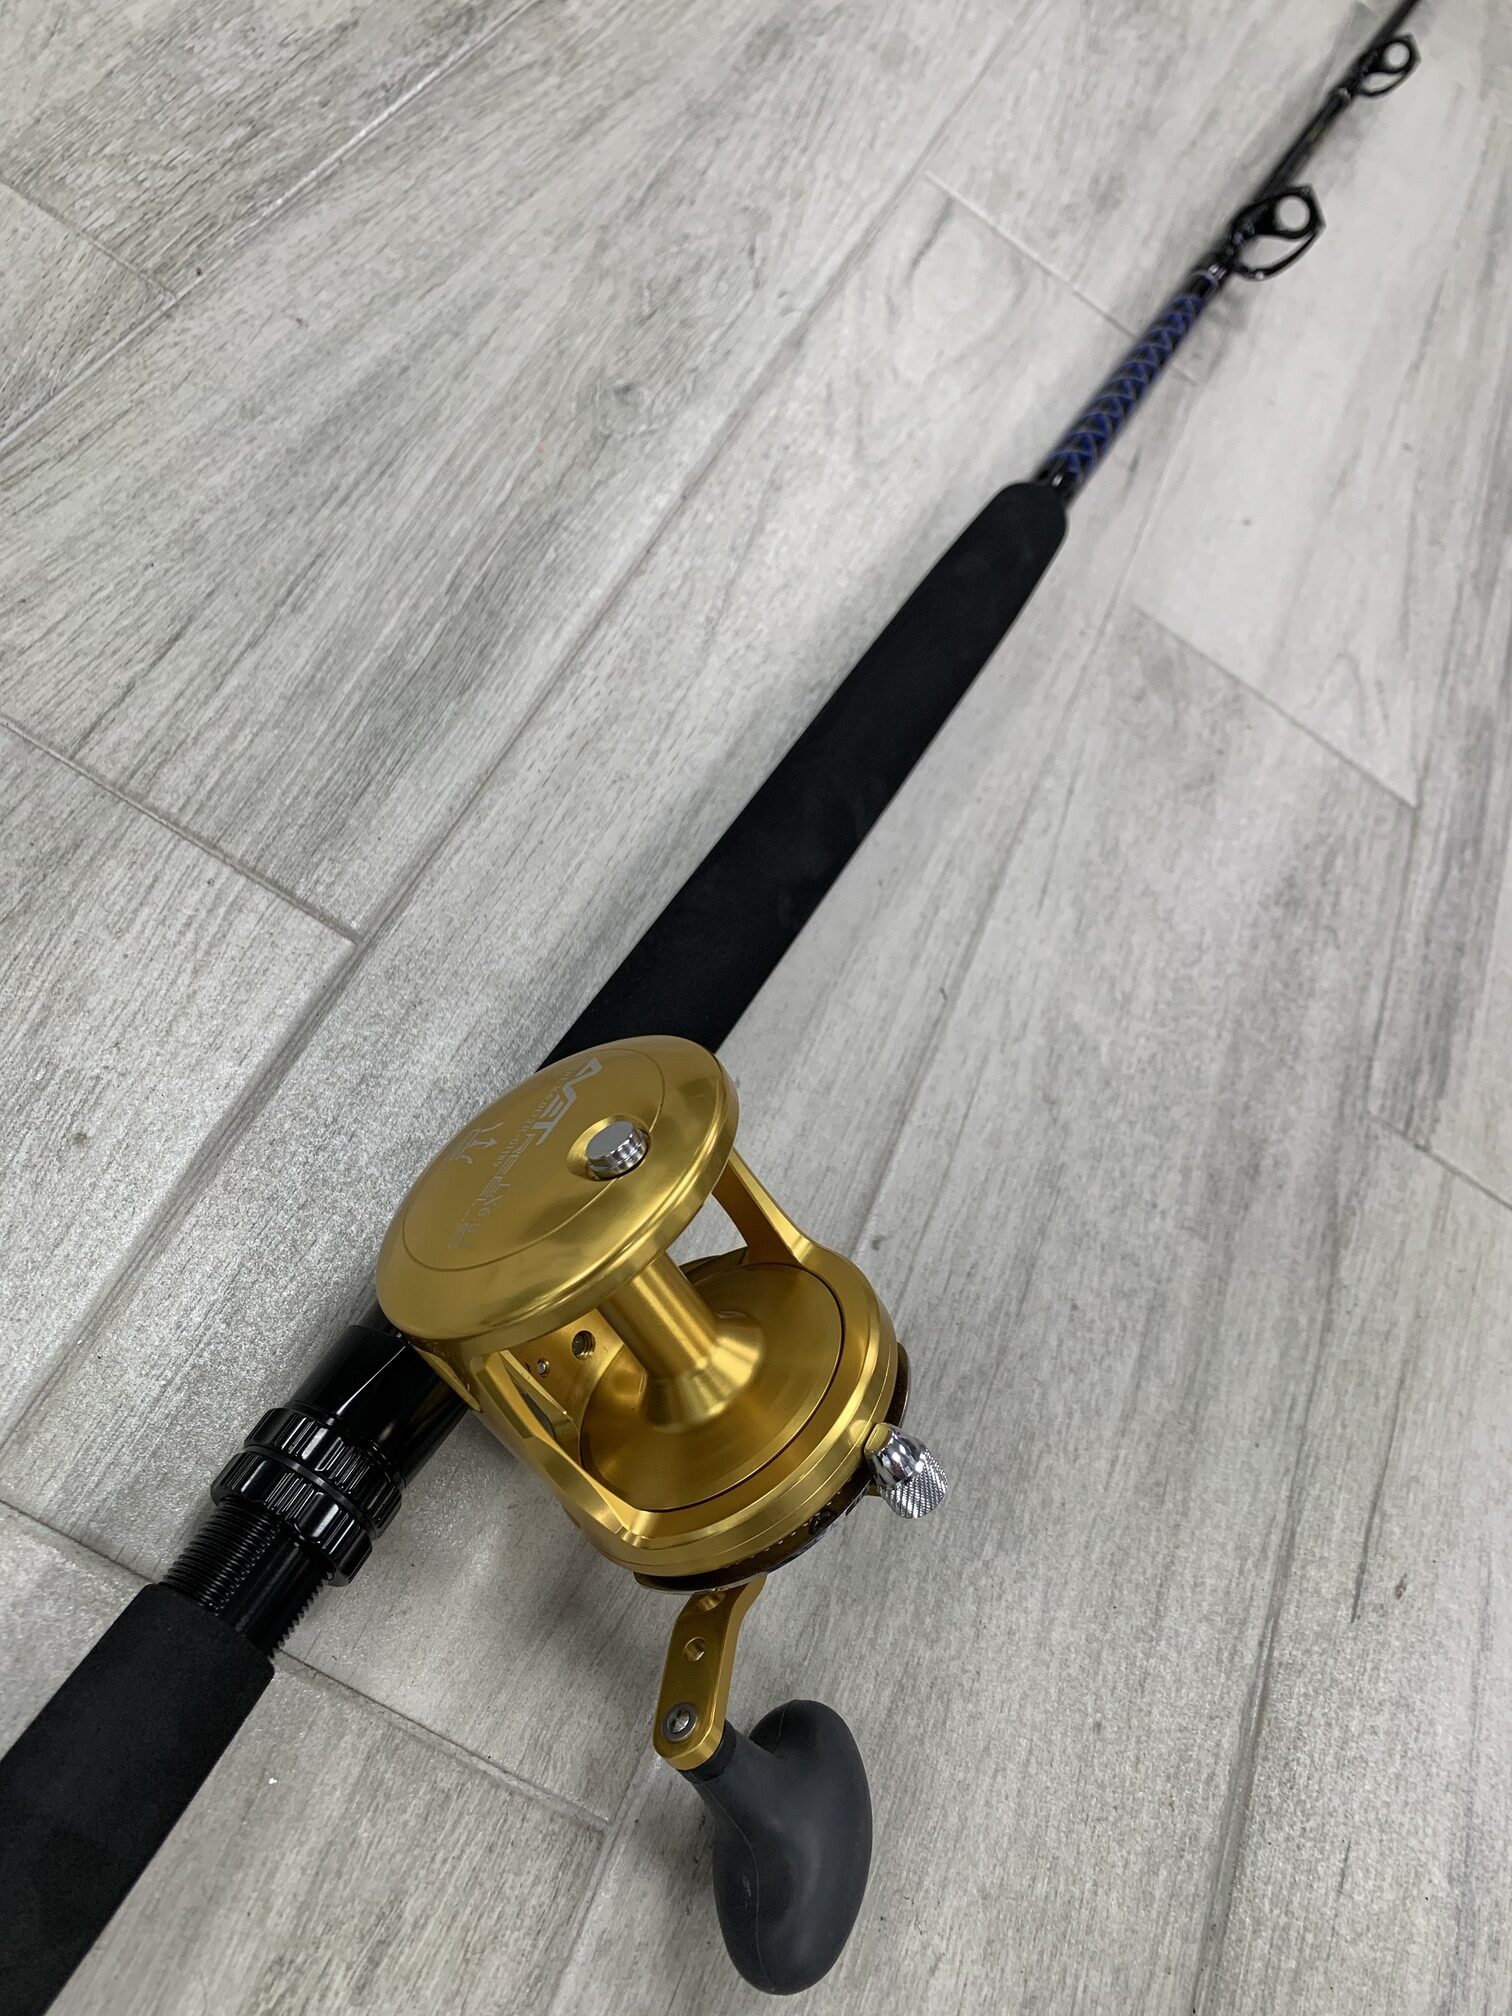 7' Kingfish 20-50 Live Bait and Bottom Fishing Rod with Avet LX G2 Gold Reel